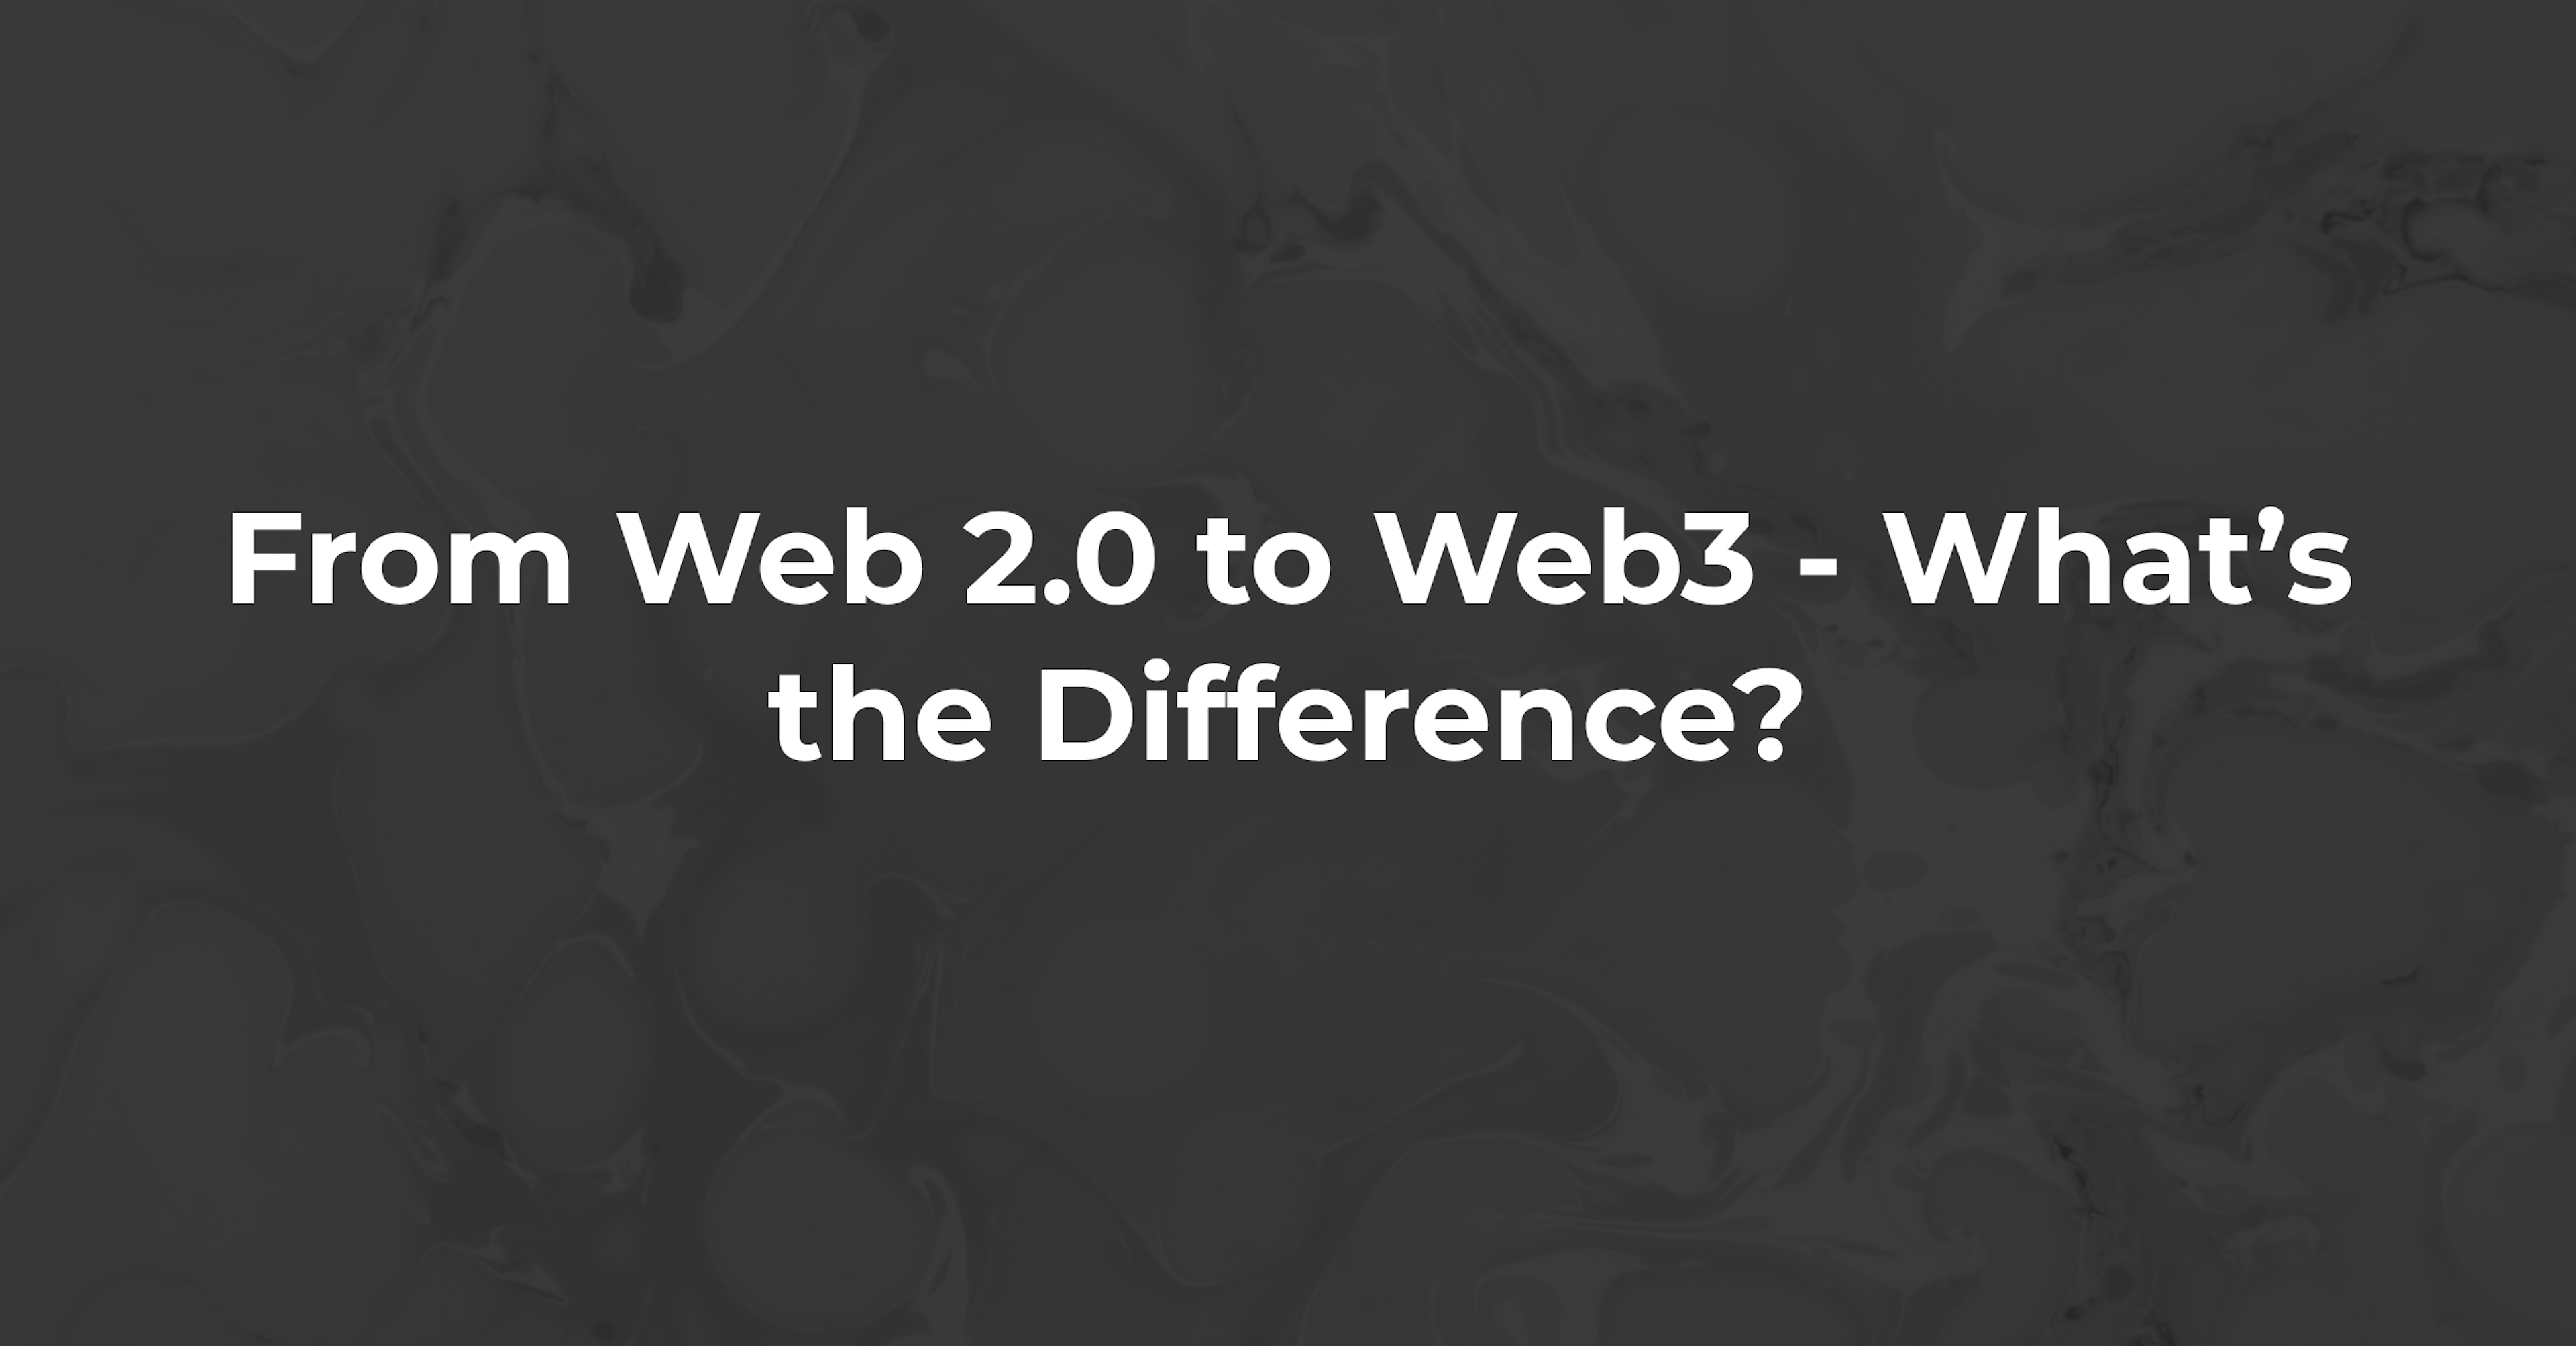 From Web 2.0 to Web3 - What’s the Difference?